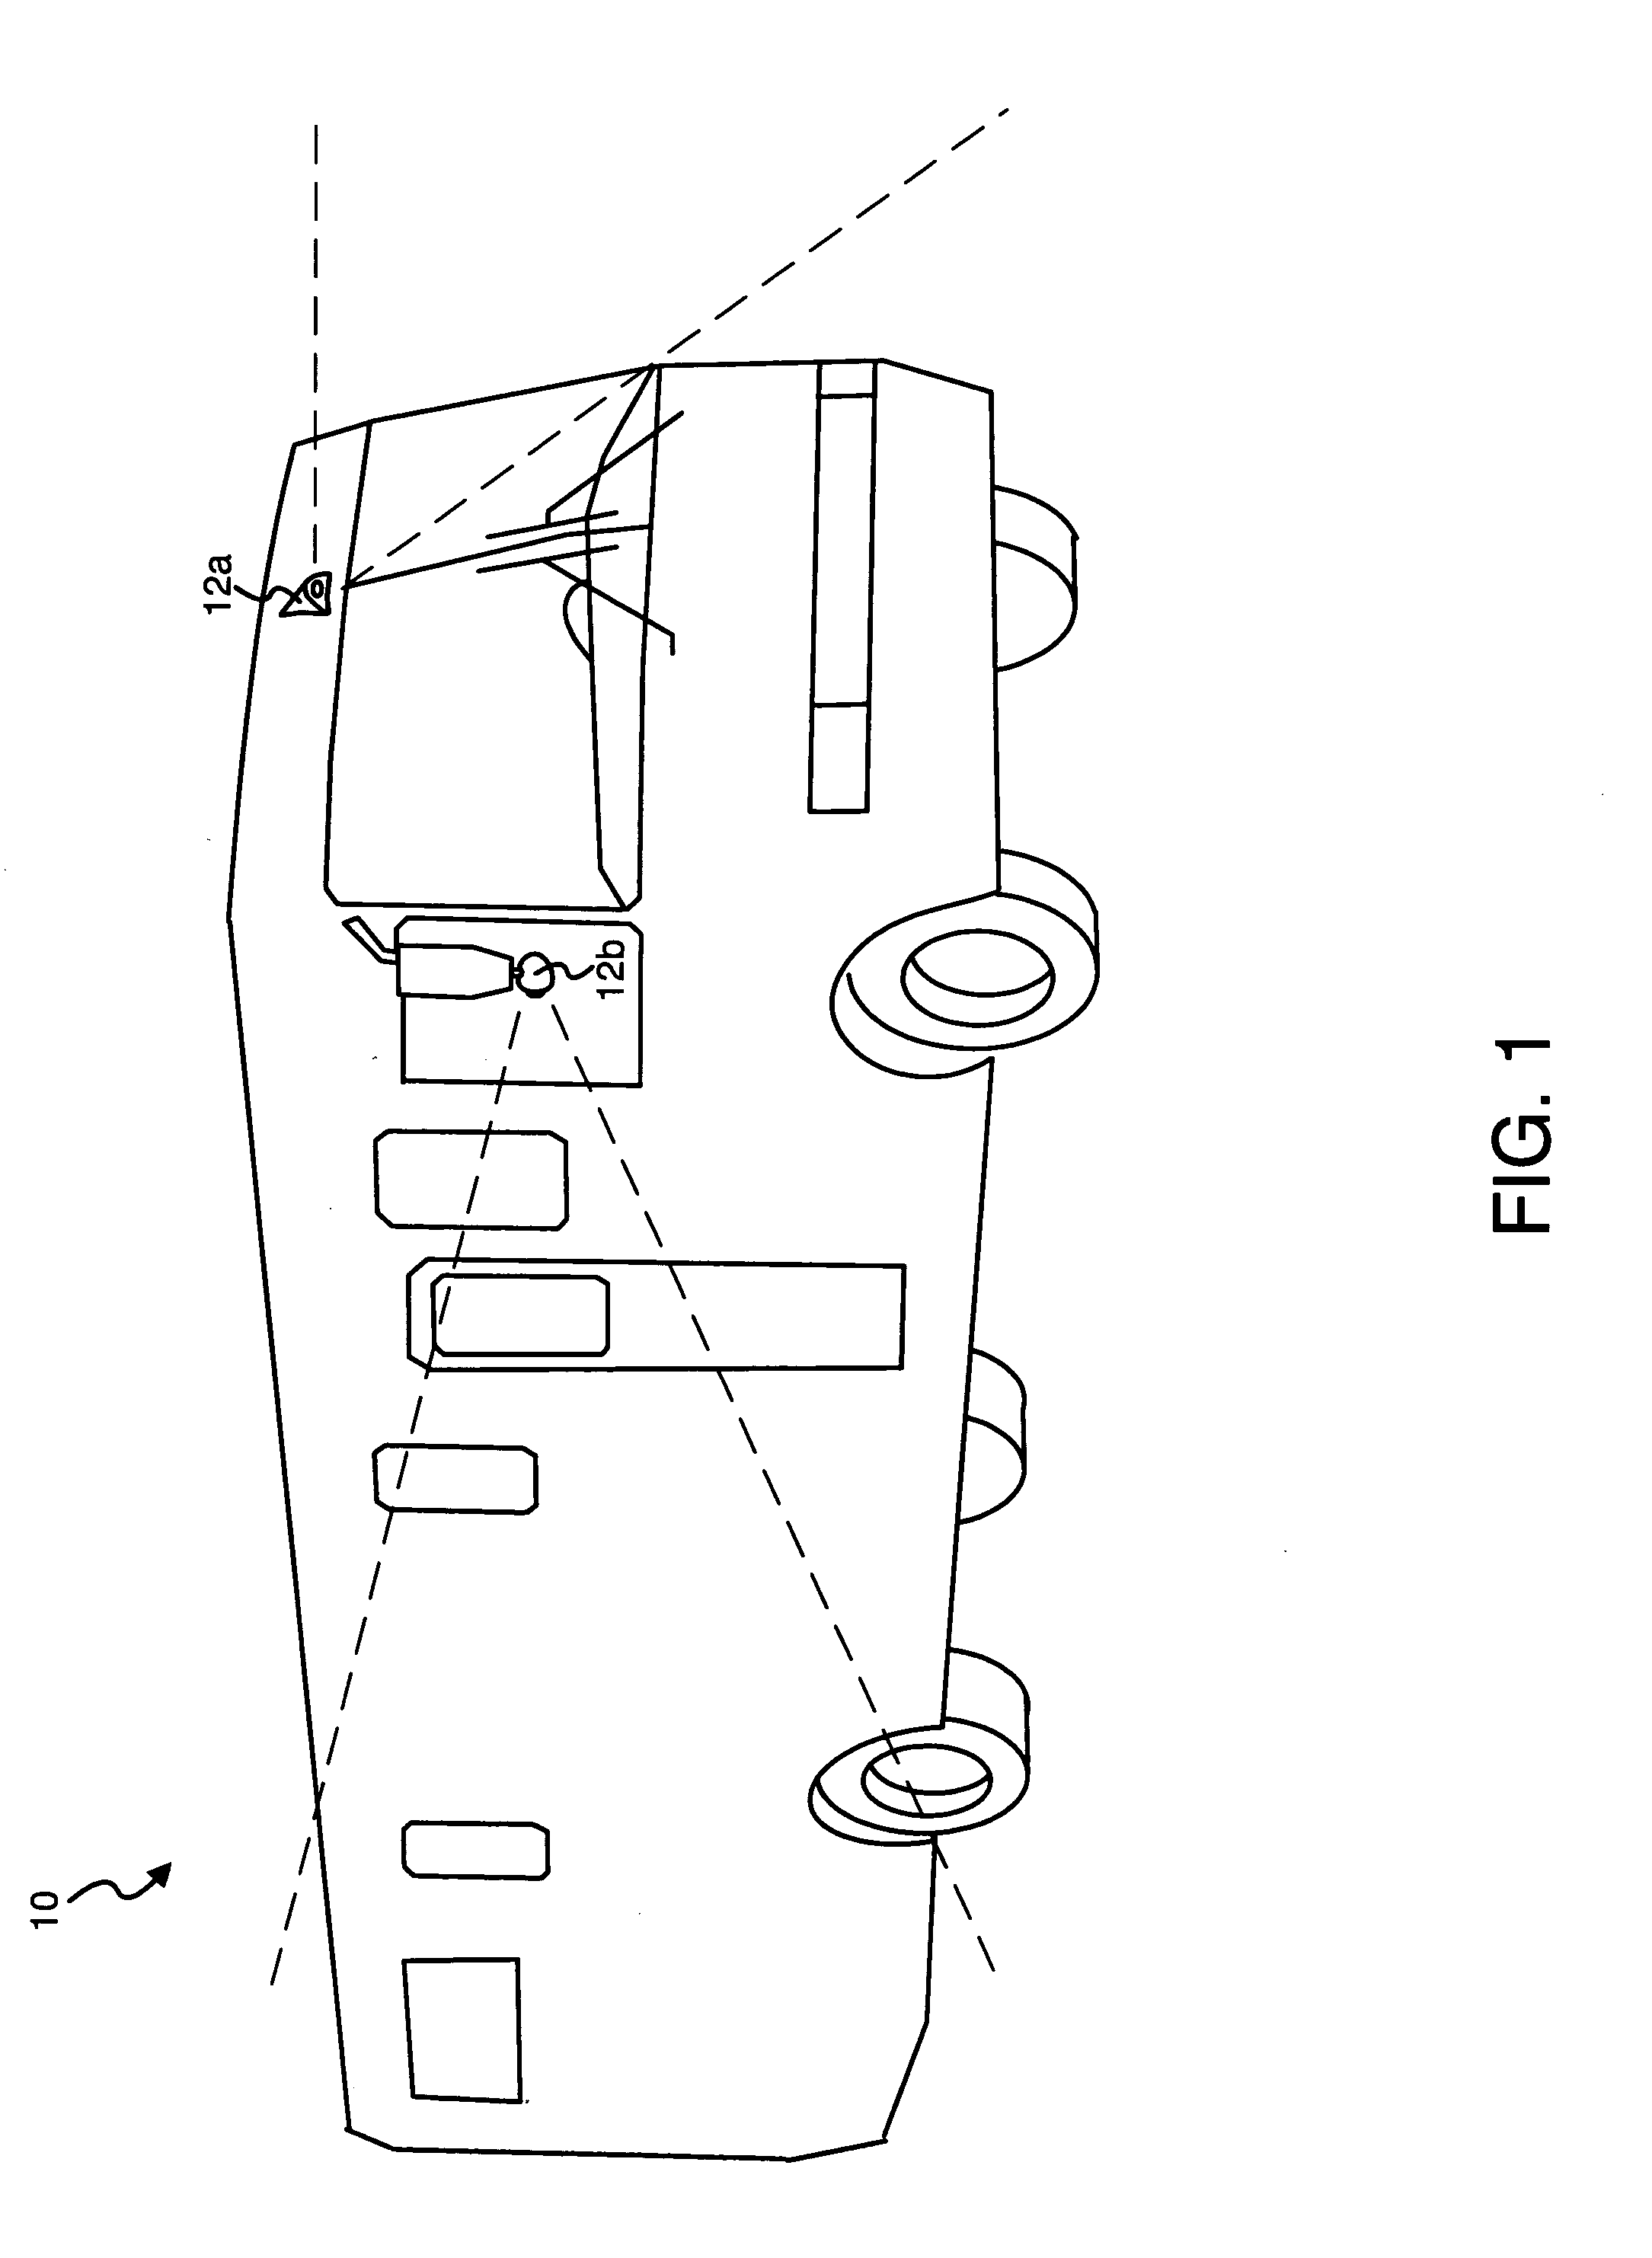 Integrated motorcoach management system apparatus and method